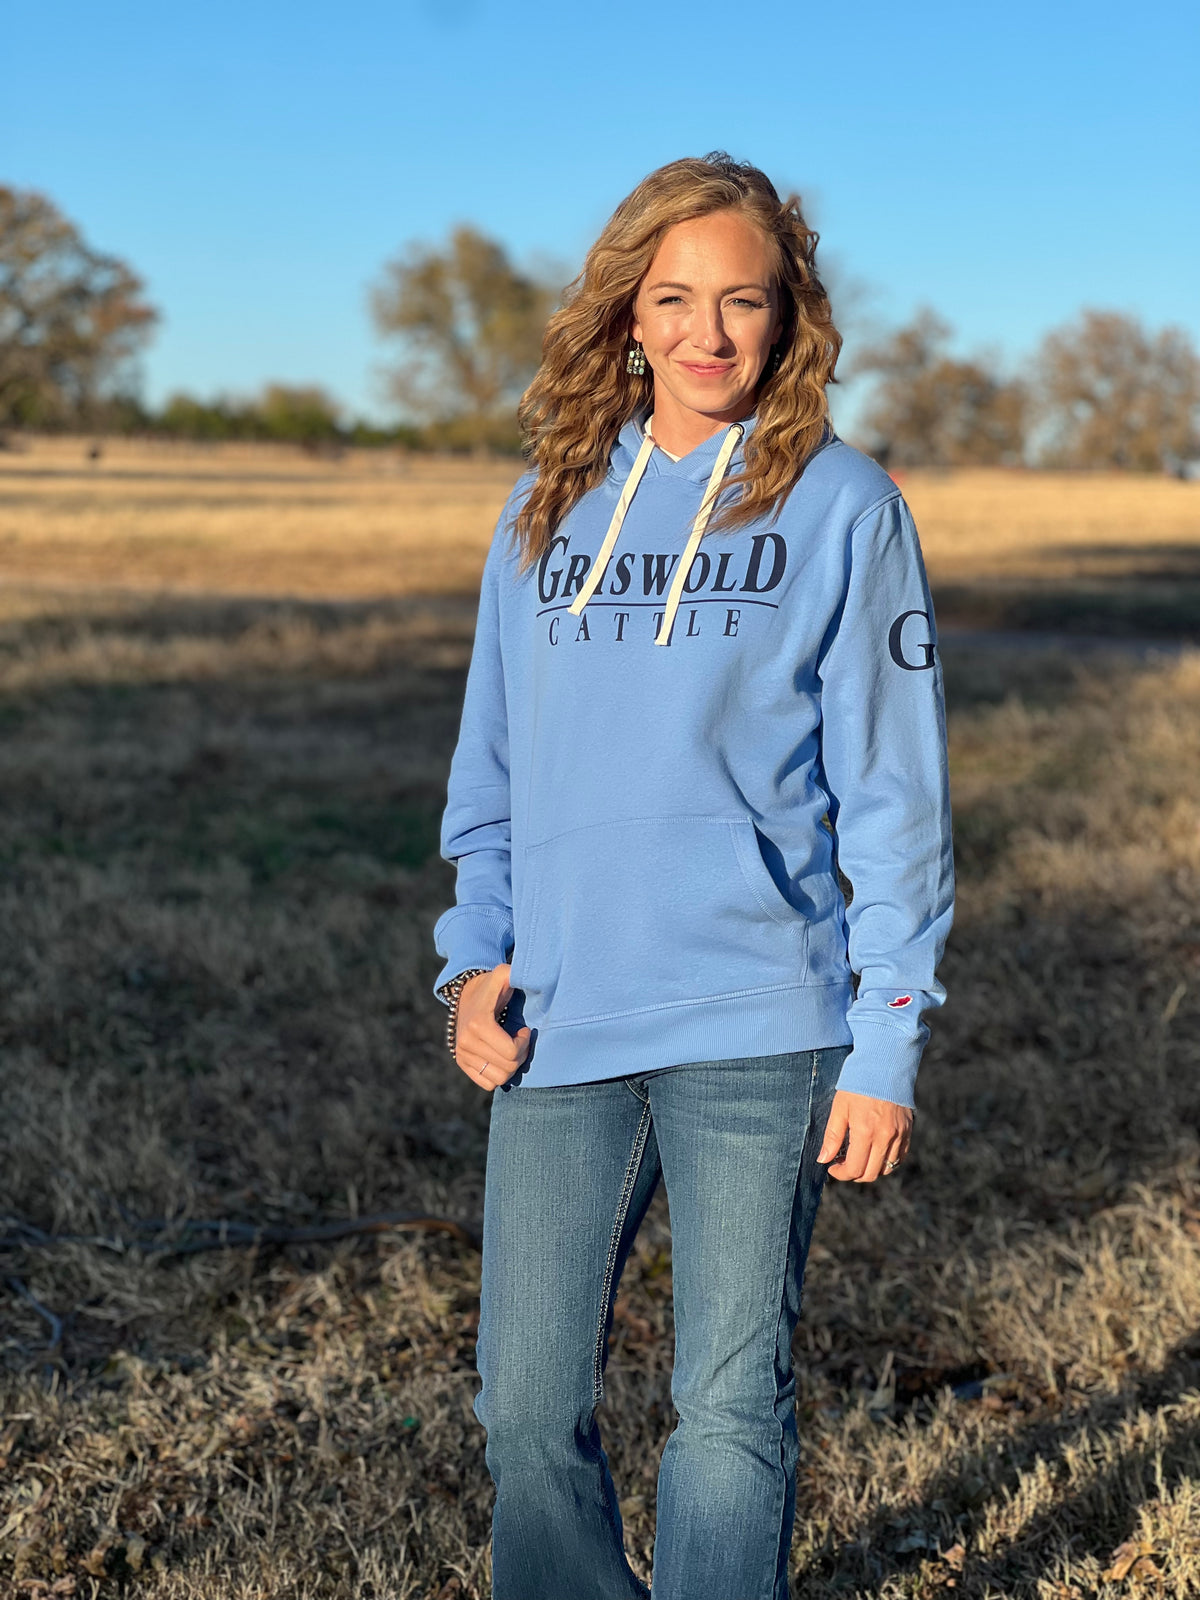 Griswold Cattle Hoody- Blue